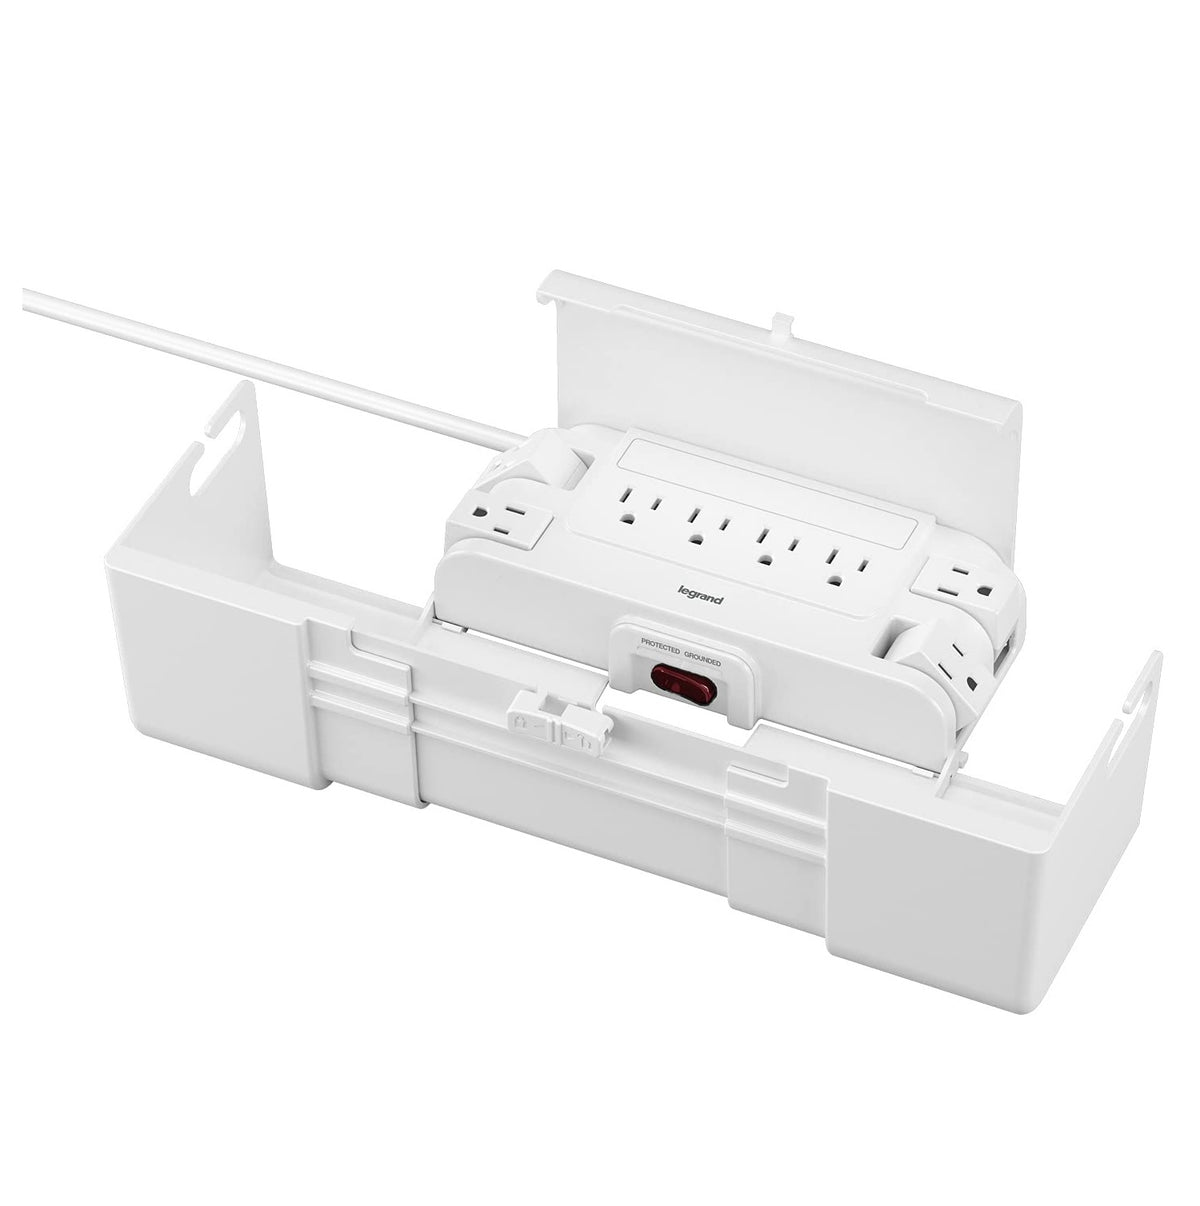 Legrand CCBP8WH Powered Cable Management Box, White